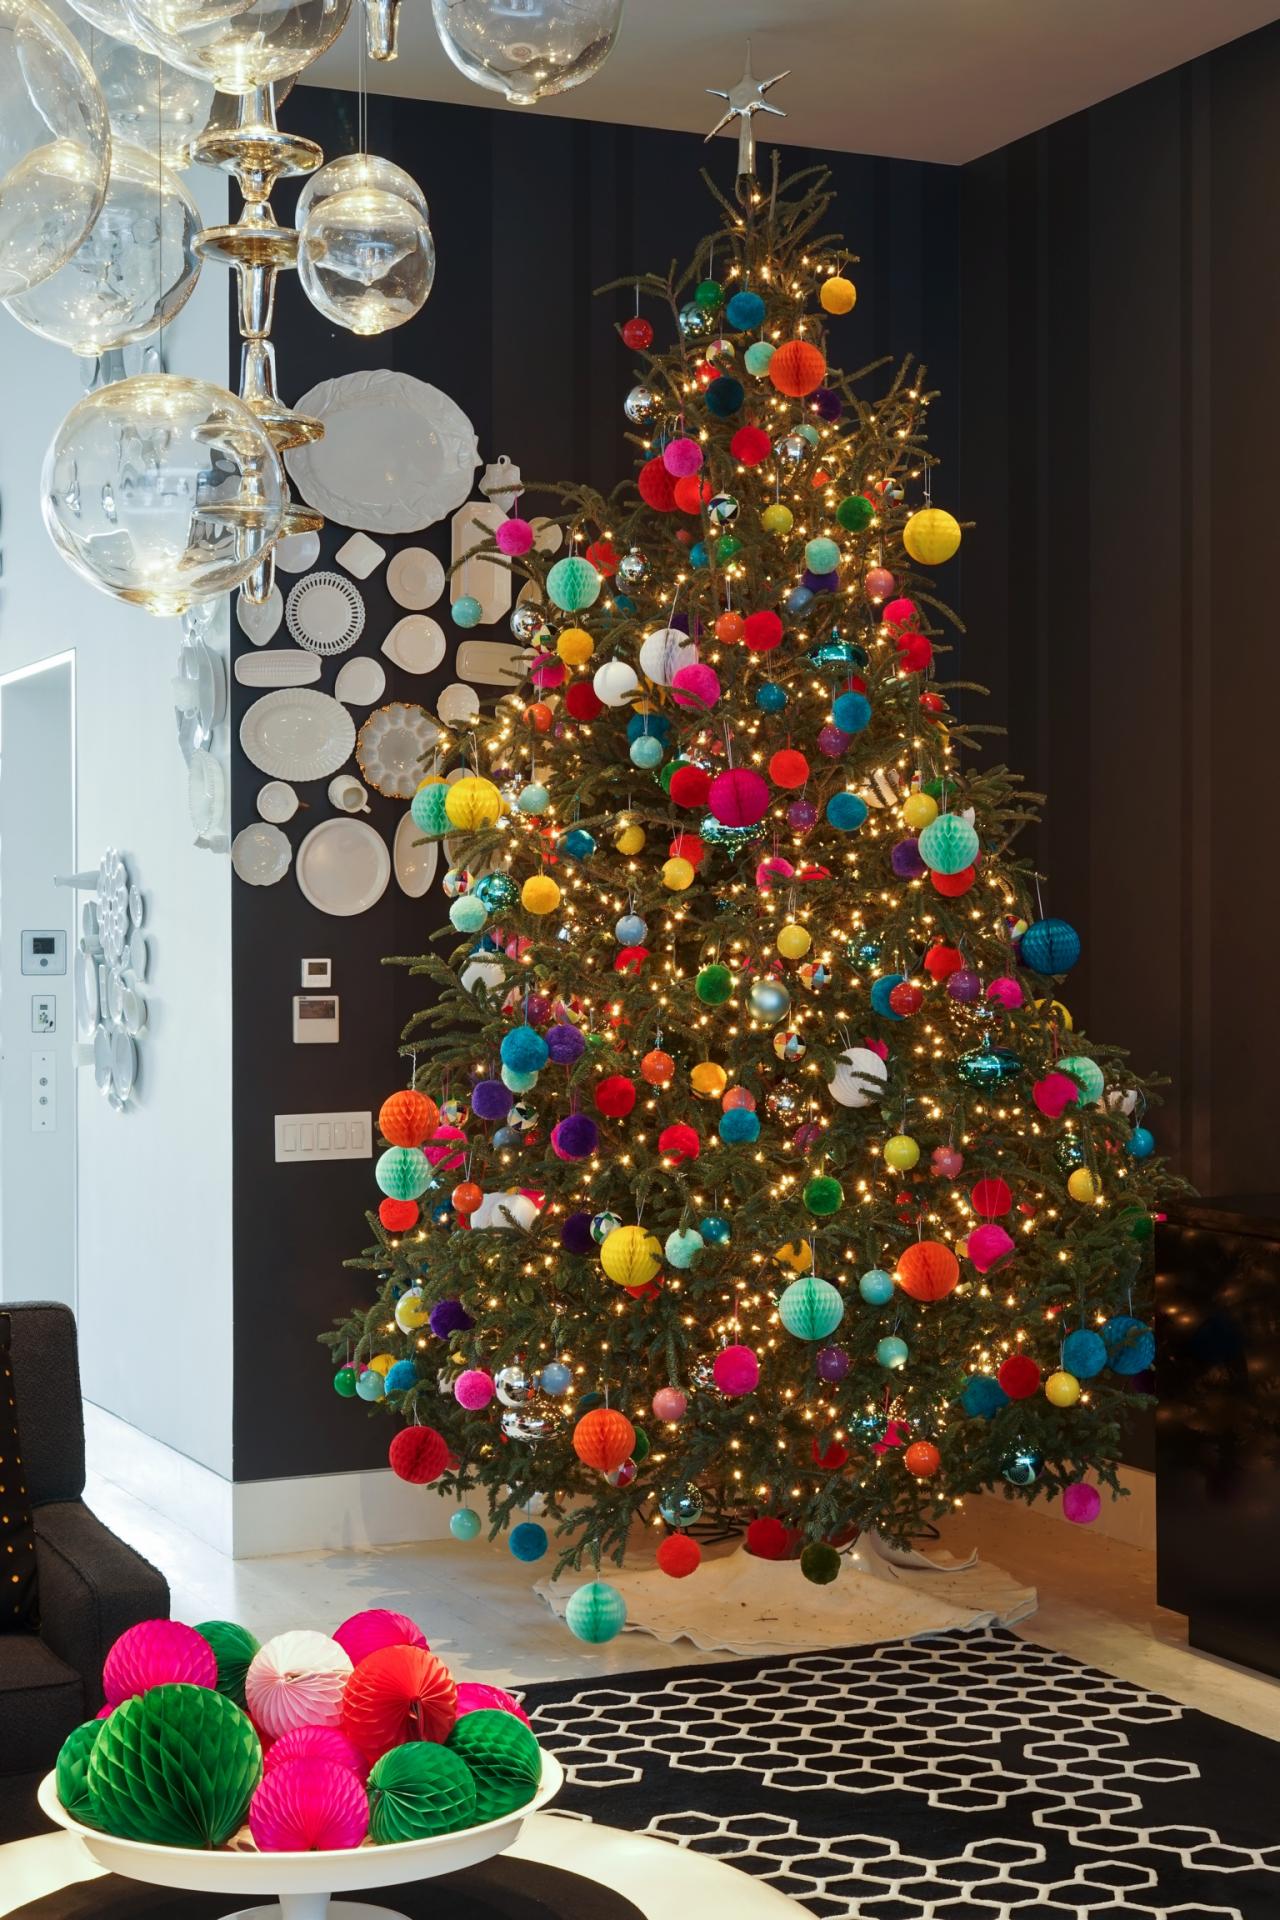 Which Tree Is Decorated On Christmas | blackbirdphotographydesign.com